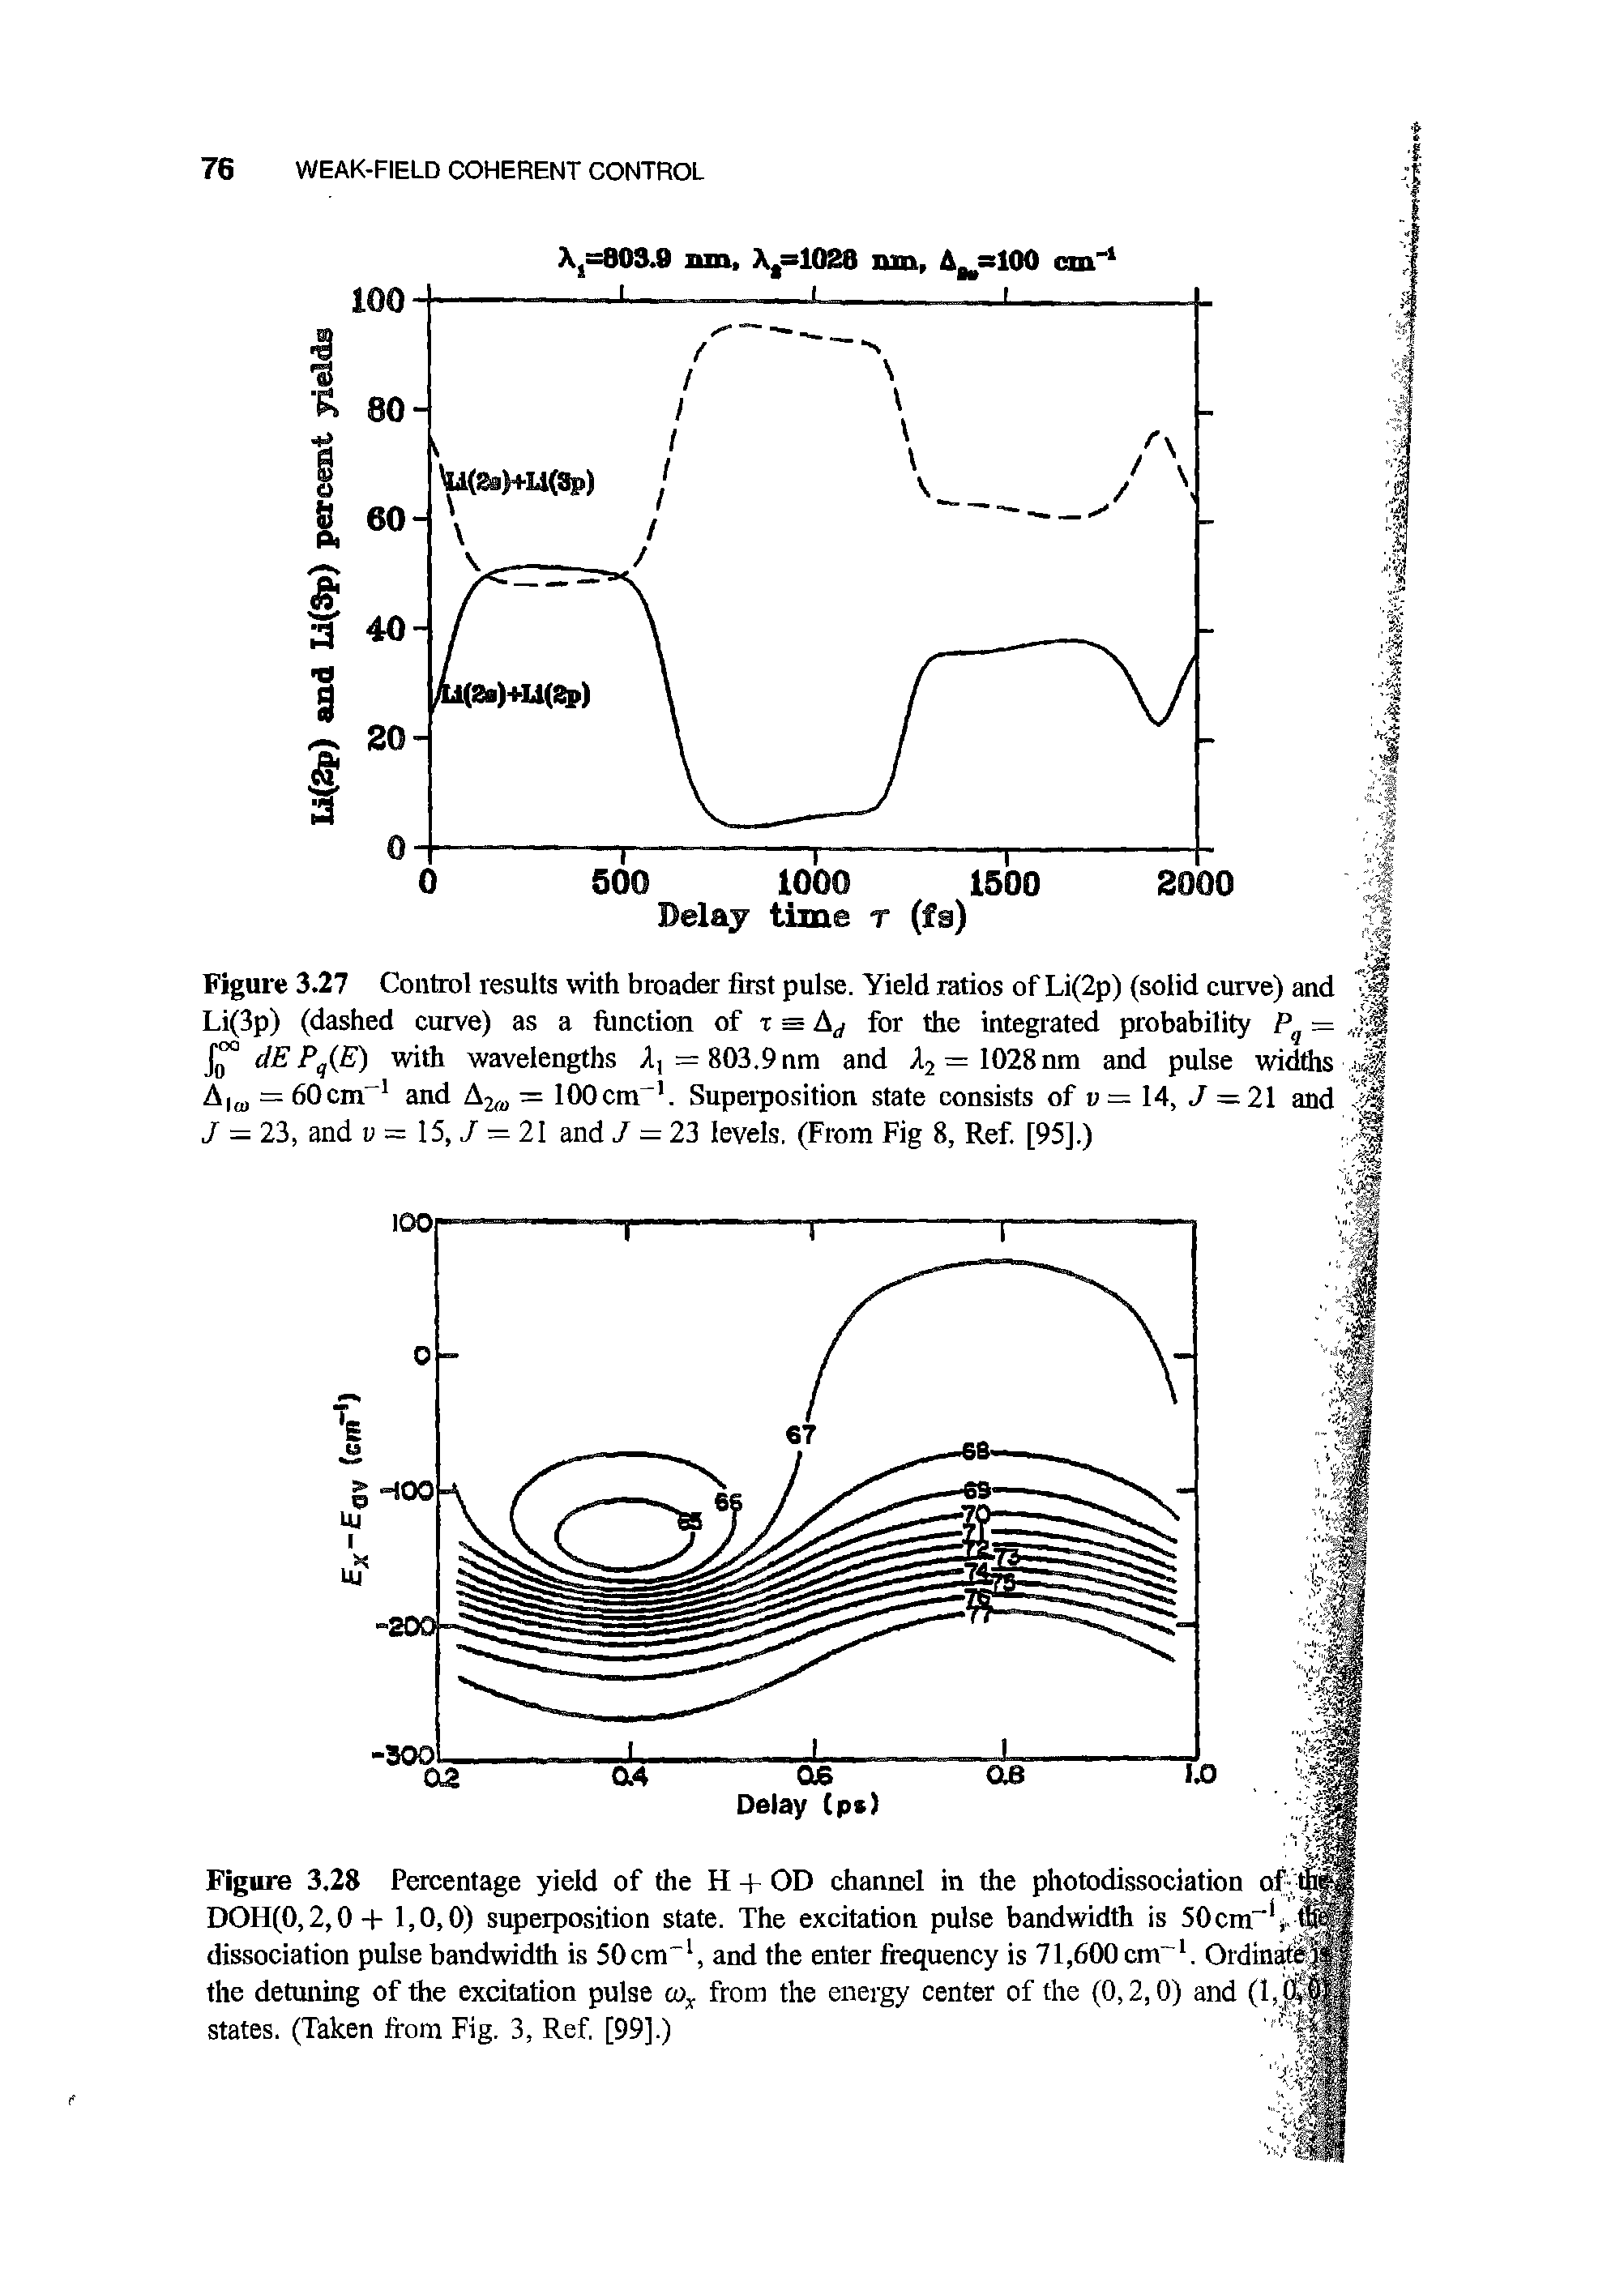 Figure 3.28 Percentage yield of the H + OD channel in the photodissociation of DOH(0,2,0+ 1,0,0) superposition state. The excitation pulse bandwidth is 50 cm"1 >.ll dissociation pulse bandwidth is 50 cm 1, and the enter frequency is 71,600 cm"1. Ordinal j the detuning of the excitation pulse cox from the energy center of the (0,2,0) and (I o,0> states. (Taken from Fig. 3, Ref. [99].)...